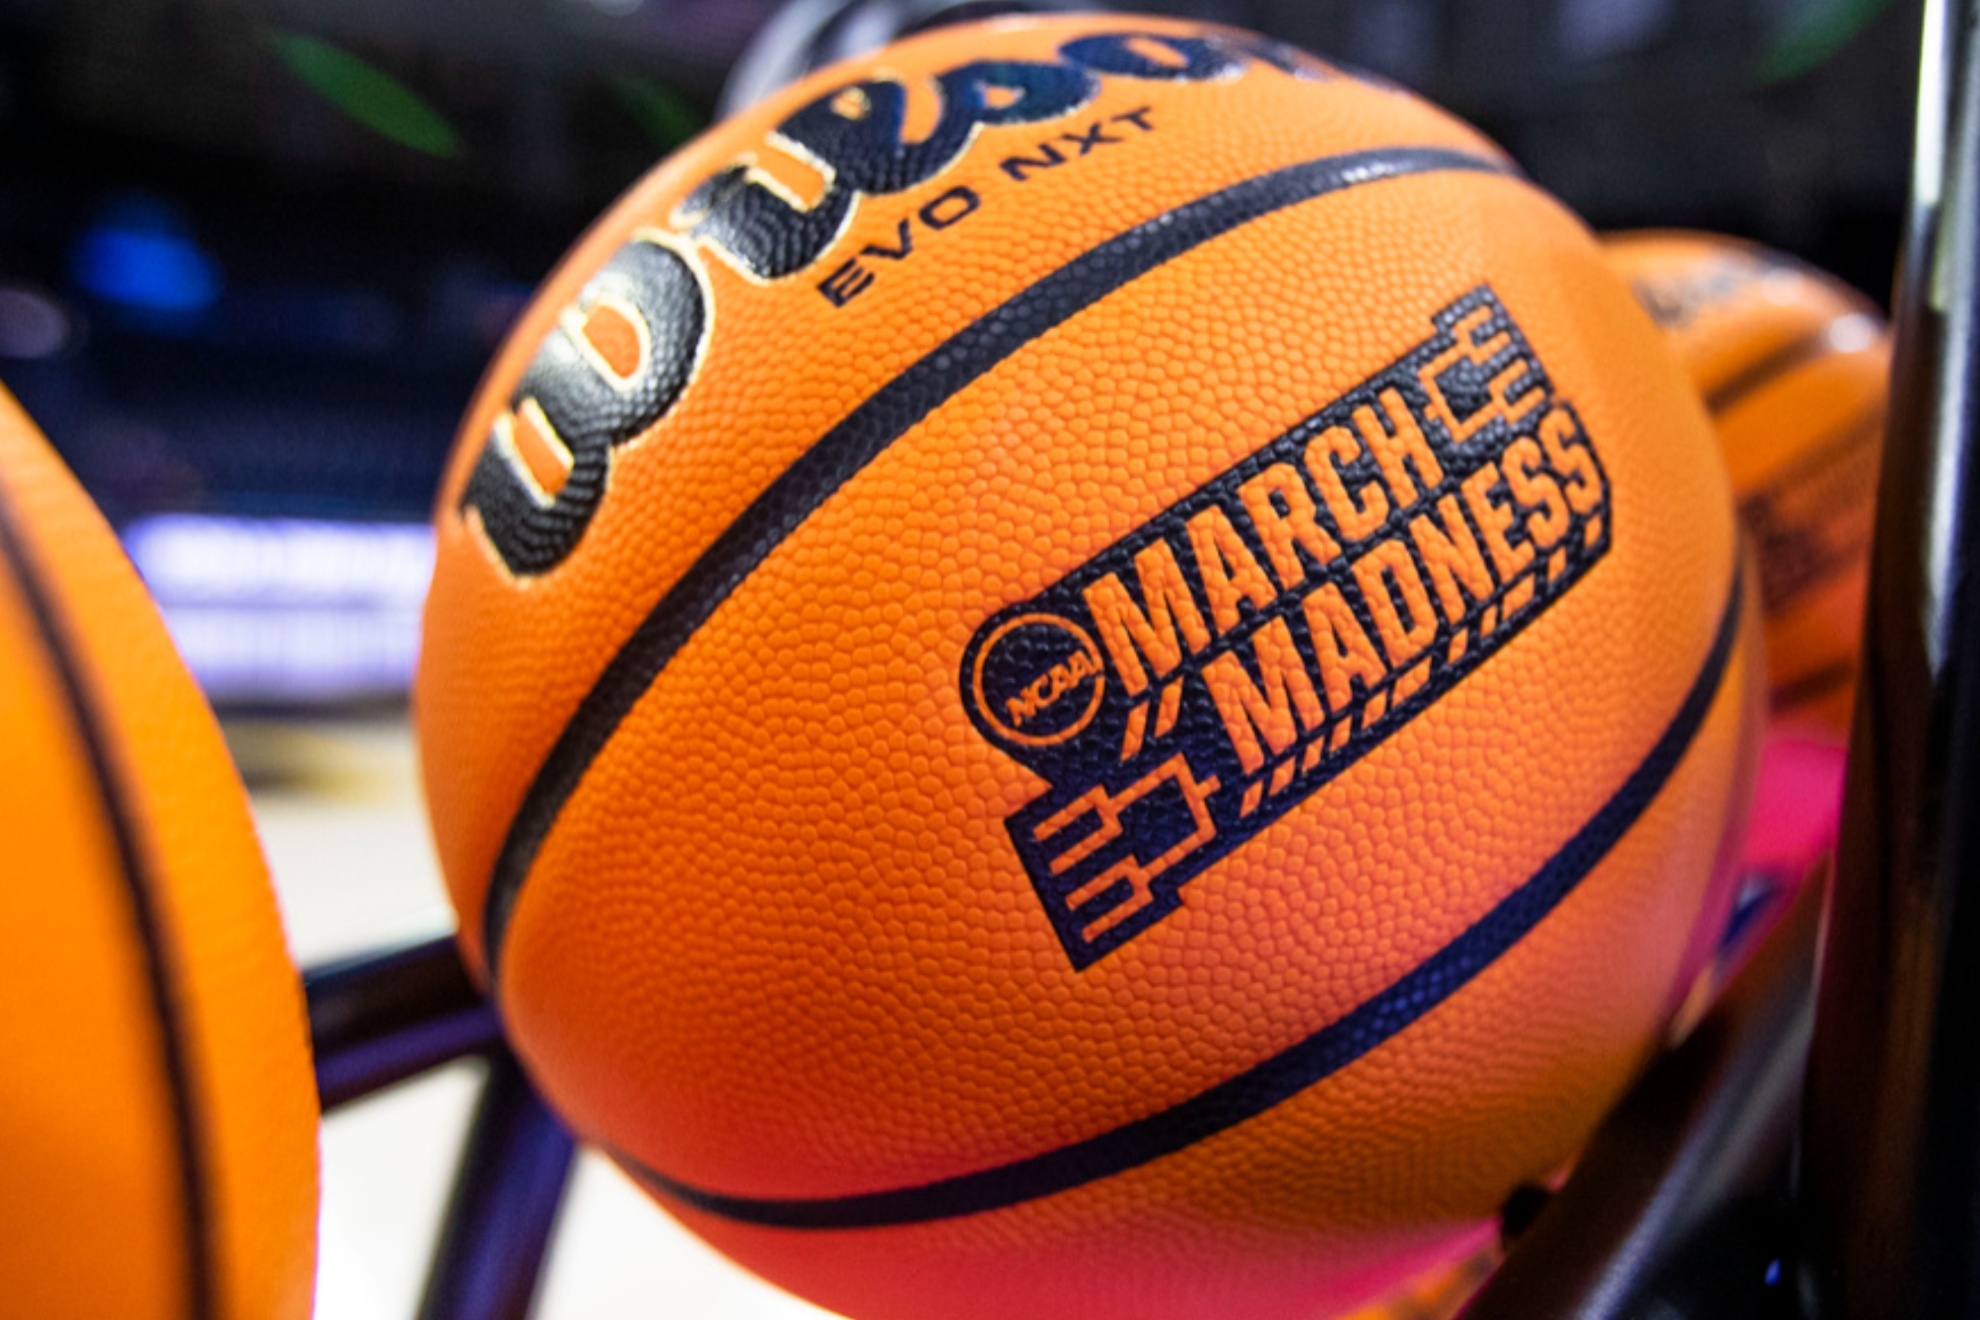 The bracket for the NCAA tournament will be unveiled this Sunday in a special ESPN broadcast